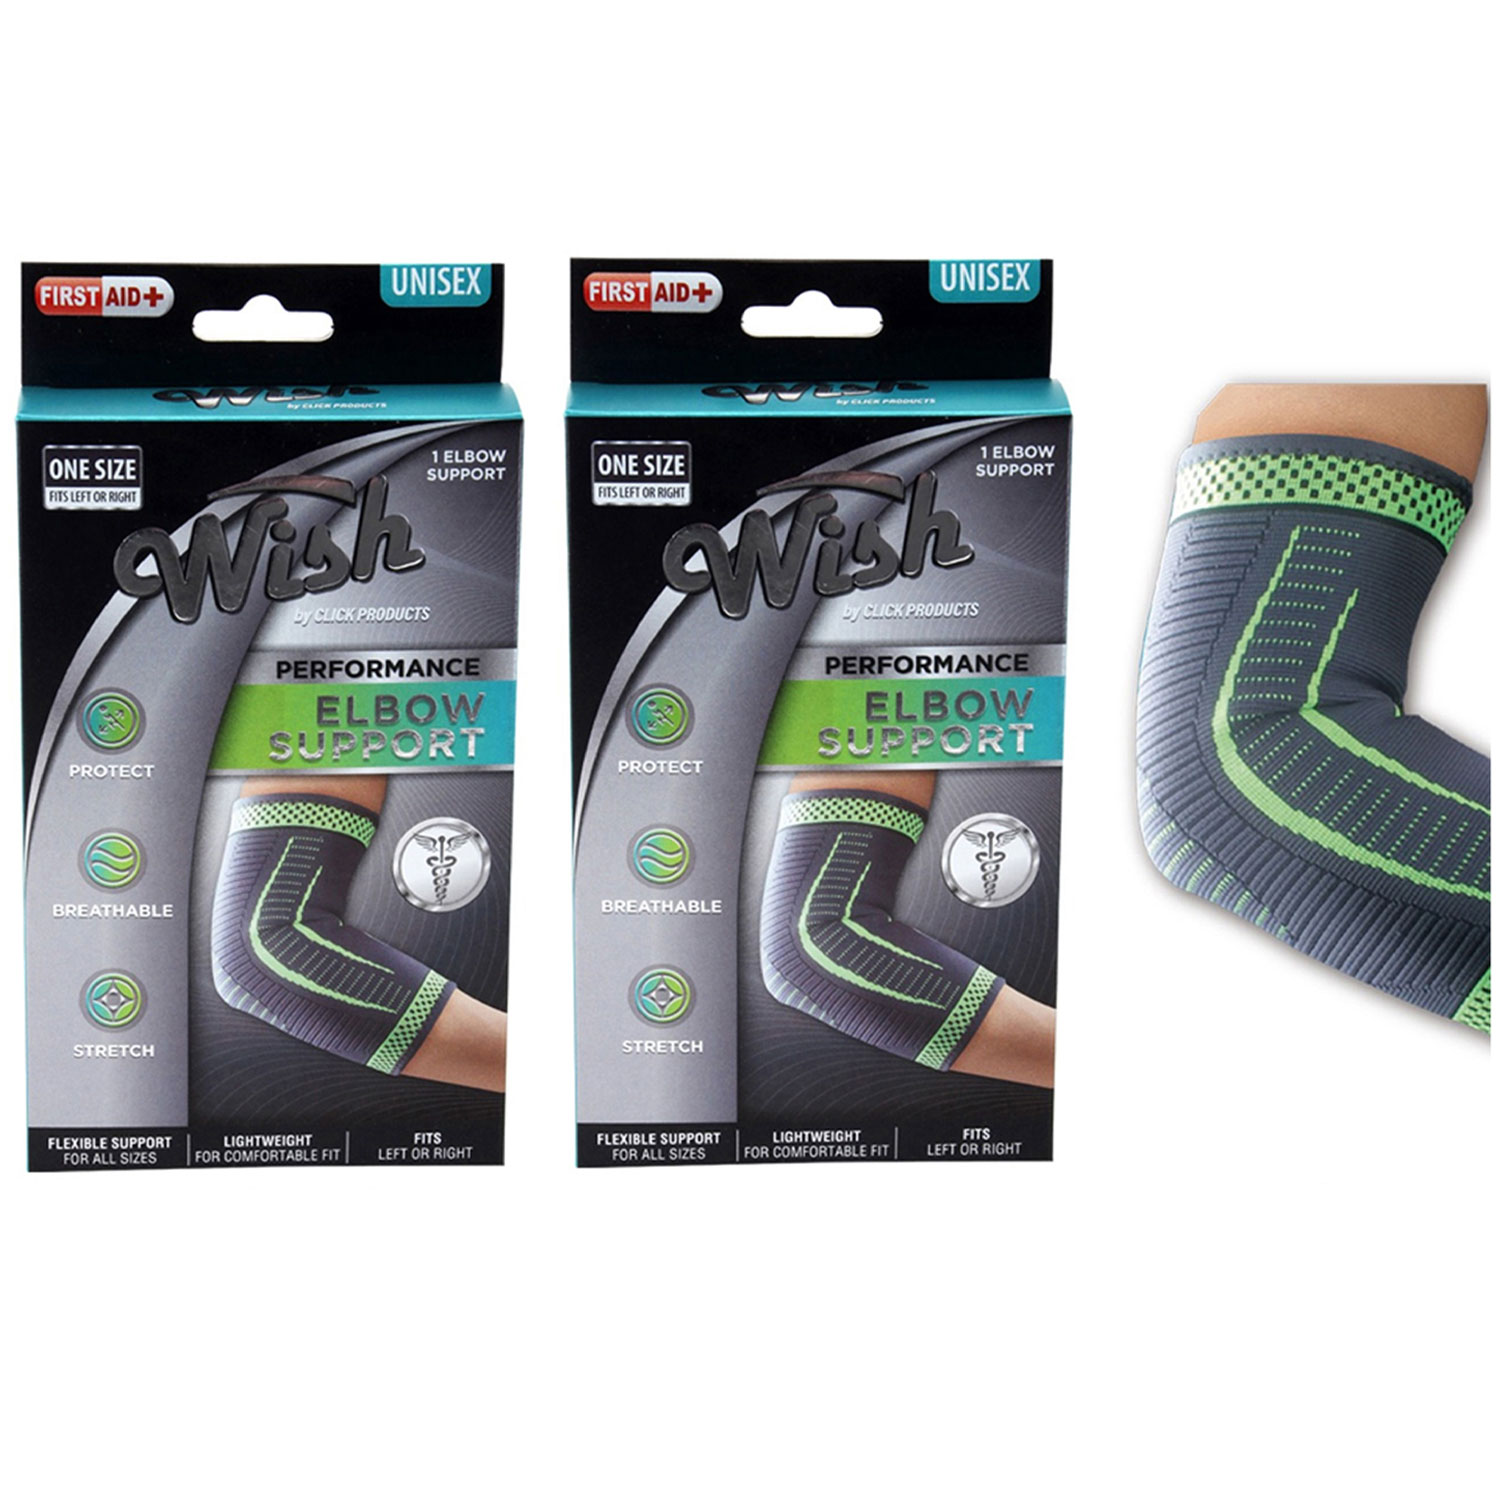 Flexible Stretch Joint Compression Sleeve Support Brace 1 And 2 Packs